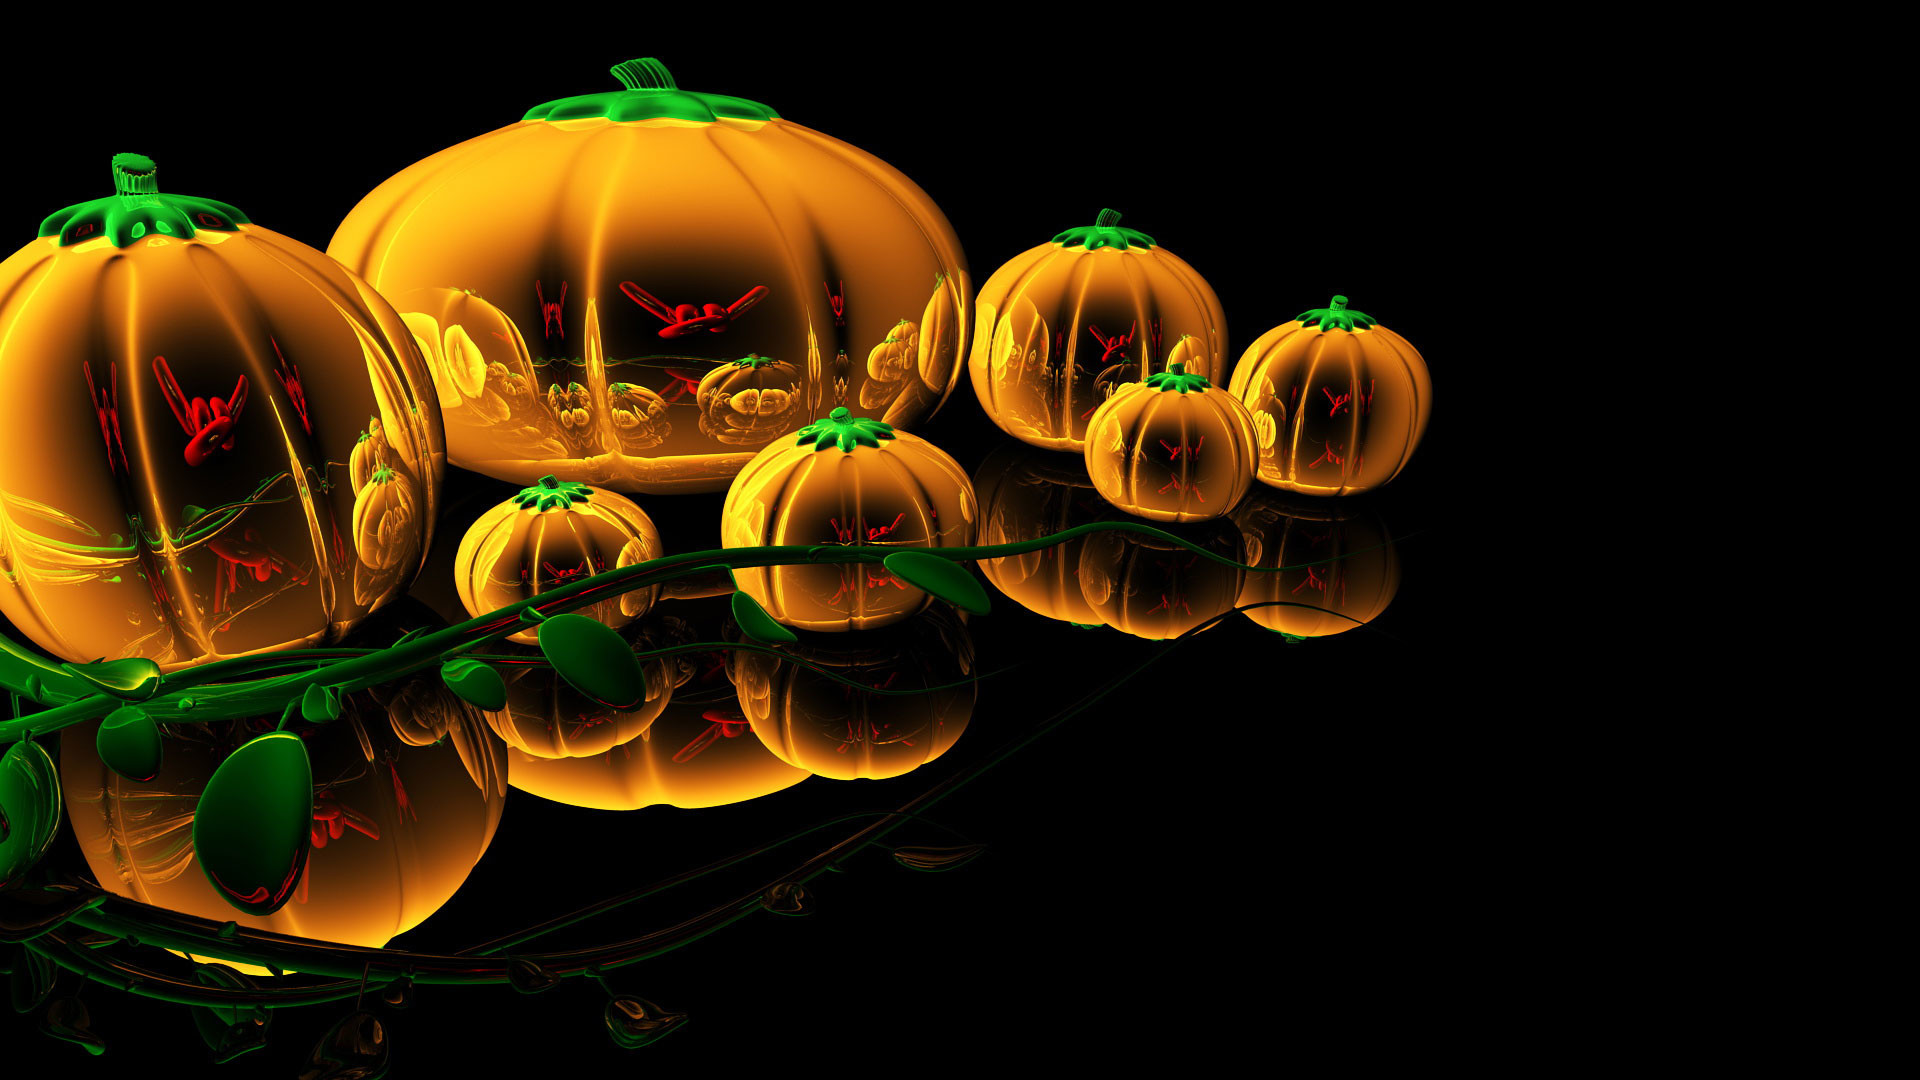 Free download 3D Halloween Wallpaper 59 images [1920x1080] for your